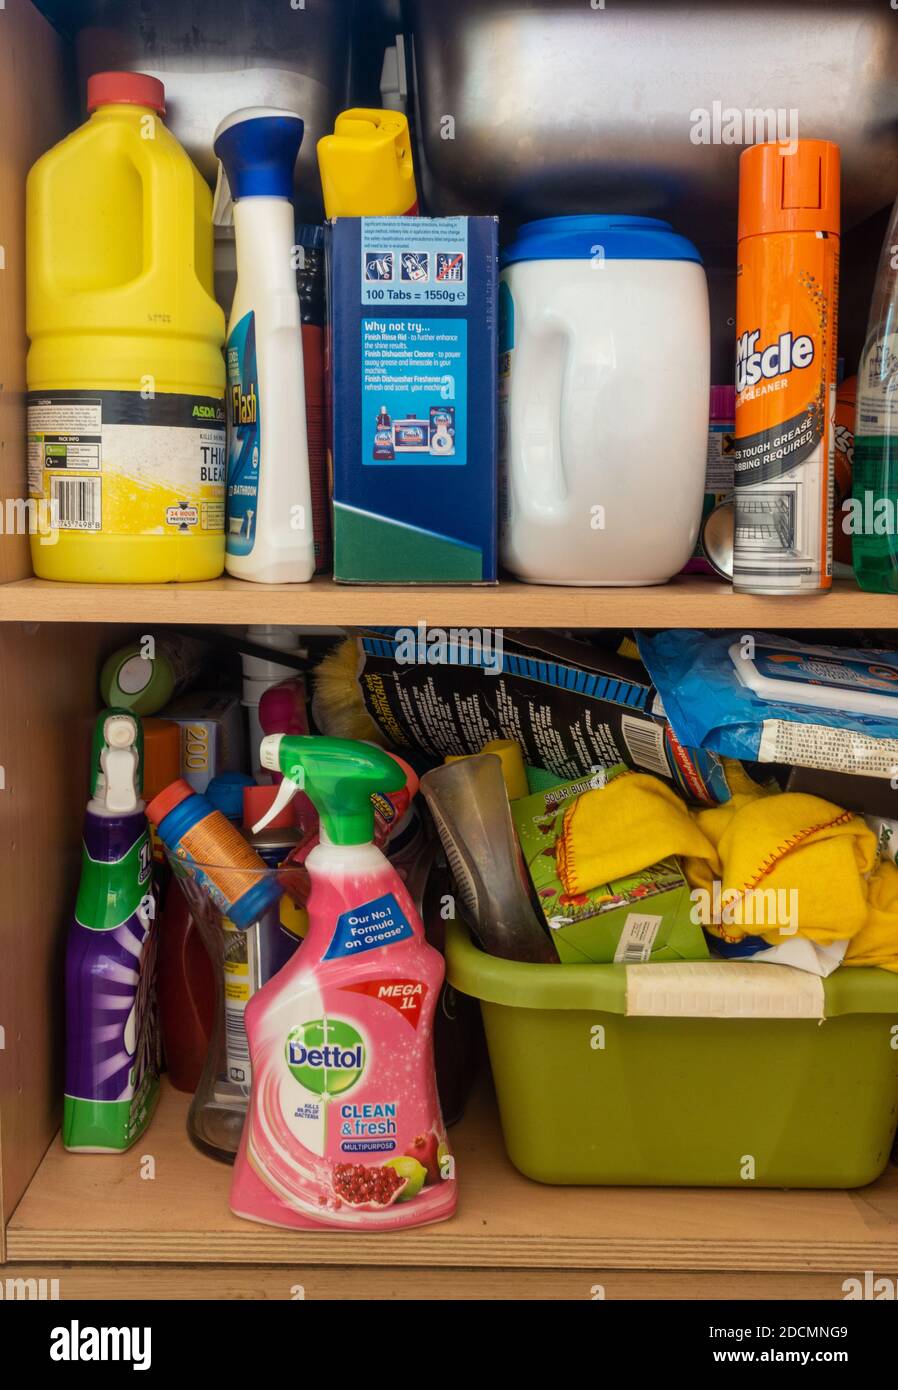 Cleaning products like bleach and antibacterial sprays in plastic bottles stored on shelves in the cupboard underneath the kitchen sink. Stock Photo